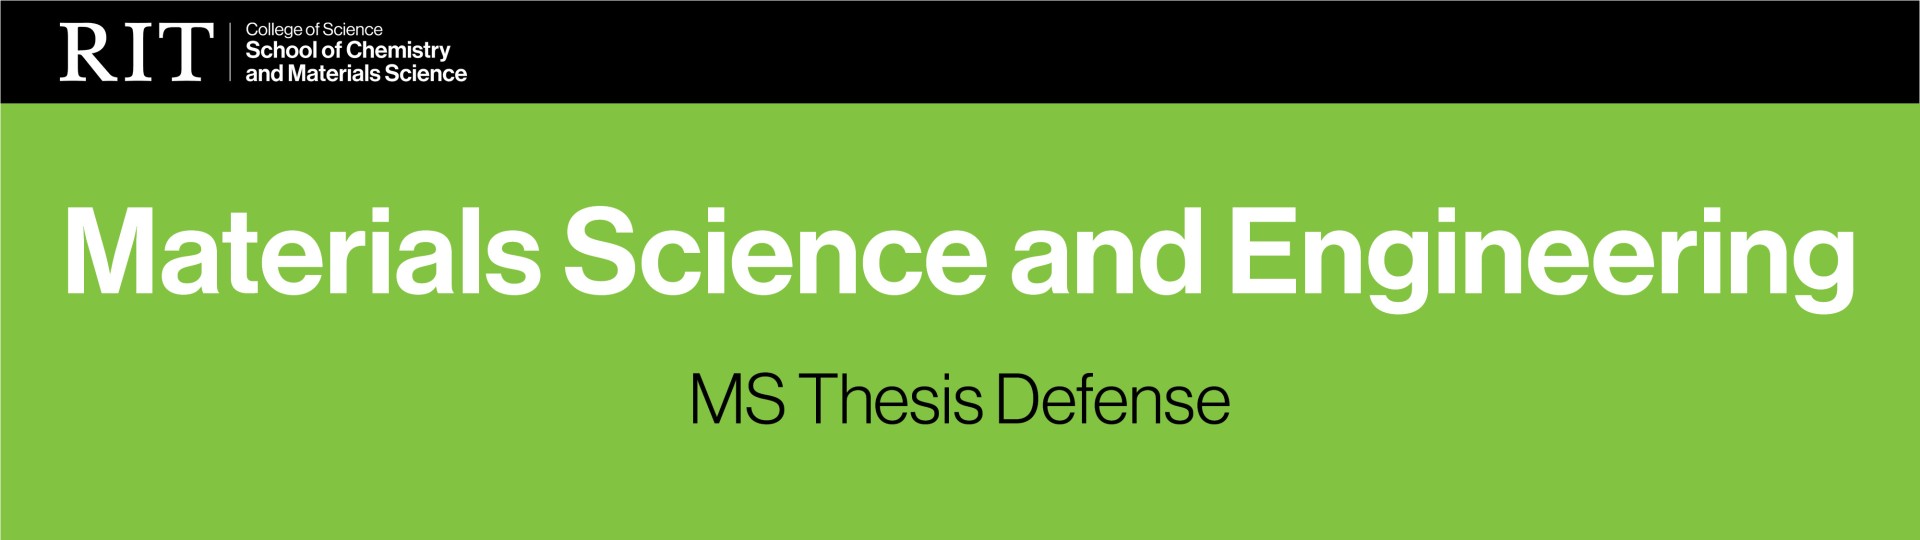 materials science and engineering ms defense event banner